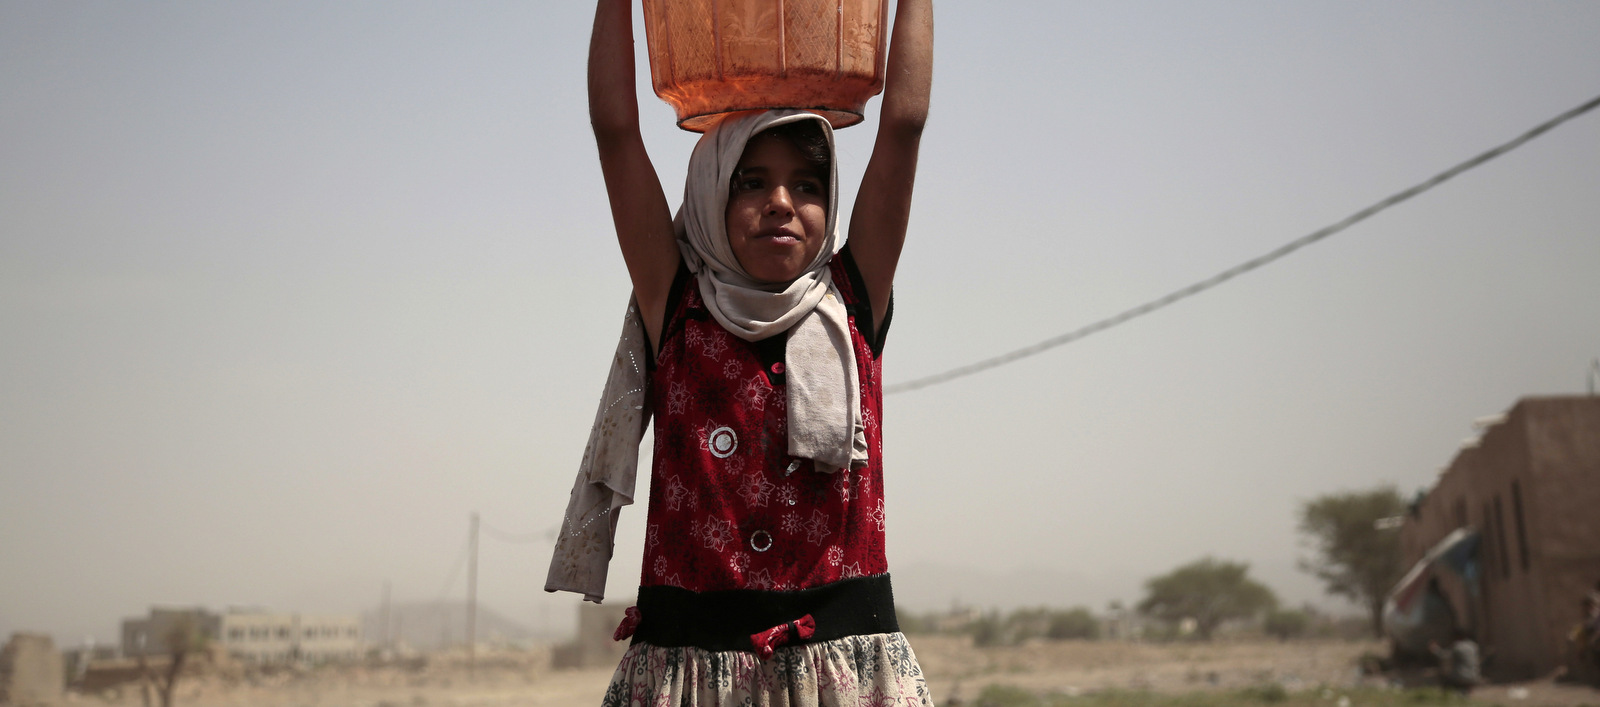 A girl carries a bucket filled with water from a well that is allegedly contaminated with cholera bacteria, on the outskirts of Sanaa, Yemen, Wednesday, July 12, 2017. The U.N. health agency said Tuesday that plans to ship cholera vaccine to Yemen are likely to be shelved over security, access and logistical challenges in the war-torn country. Yemen's suspected cholera caseload has surged past 313,000, causing over 1,700 deaths in the world's largest outbreak. (AP Photo/Hani Mohammed)